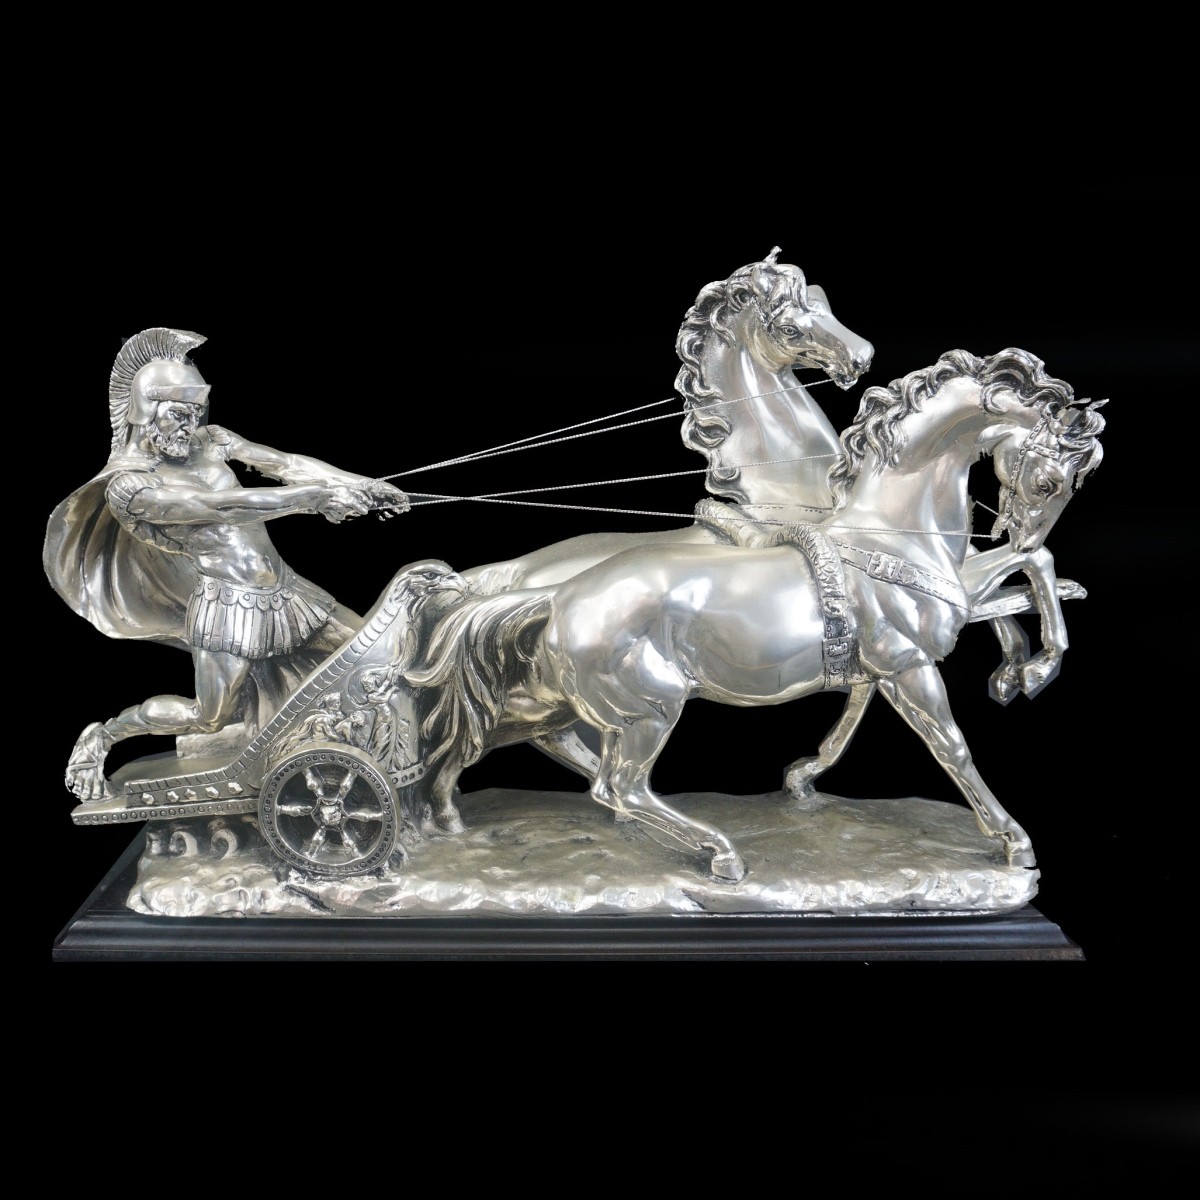 20th C. Silver-Clad Chariot